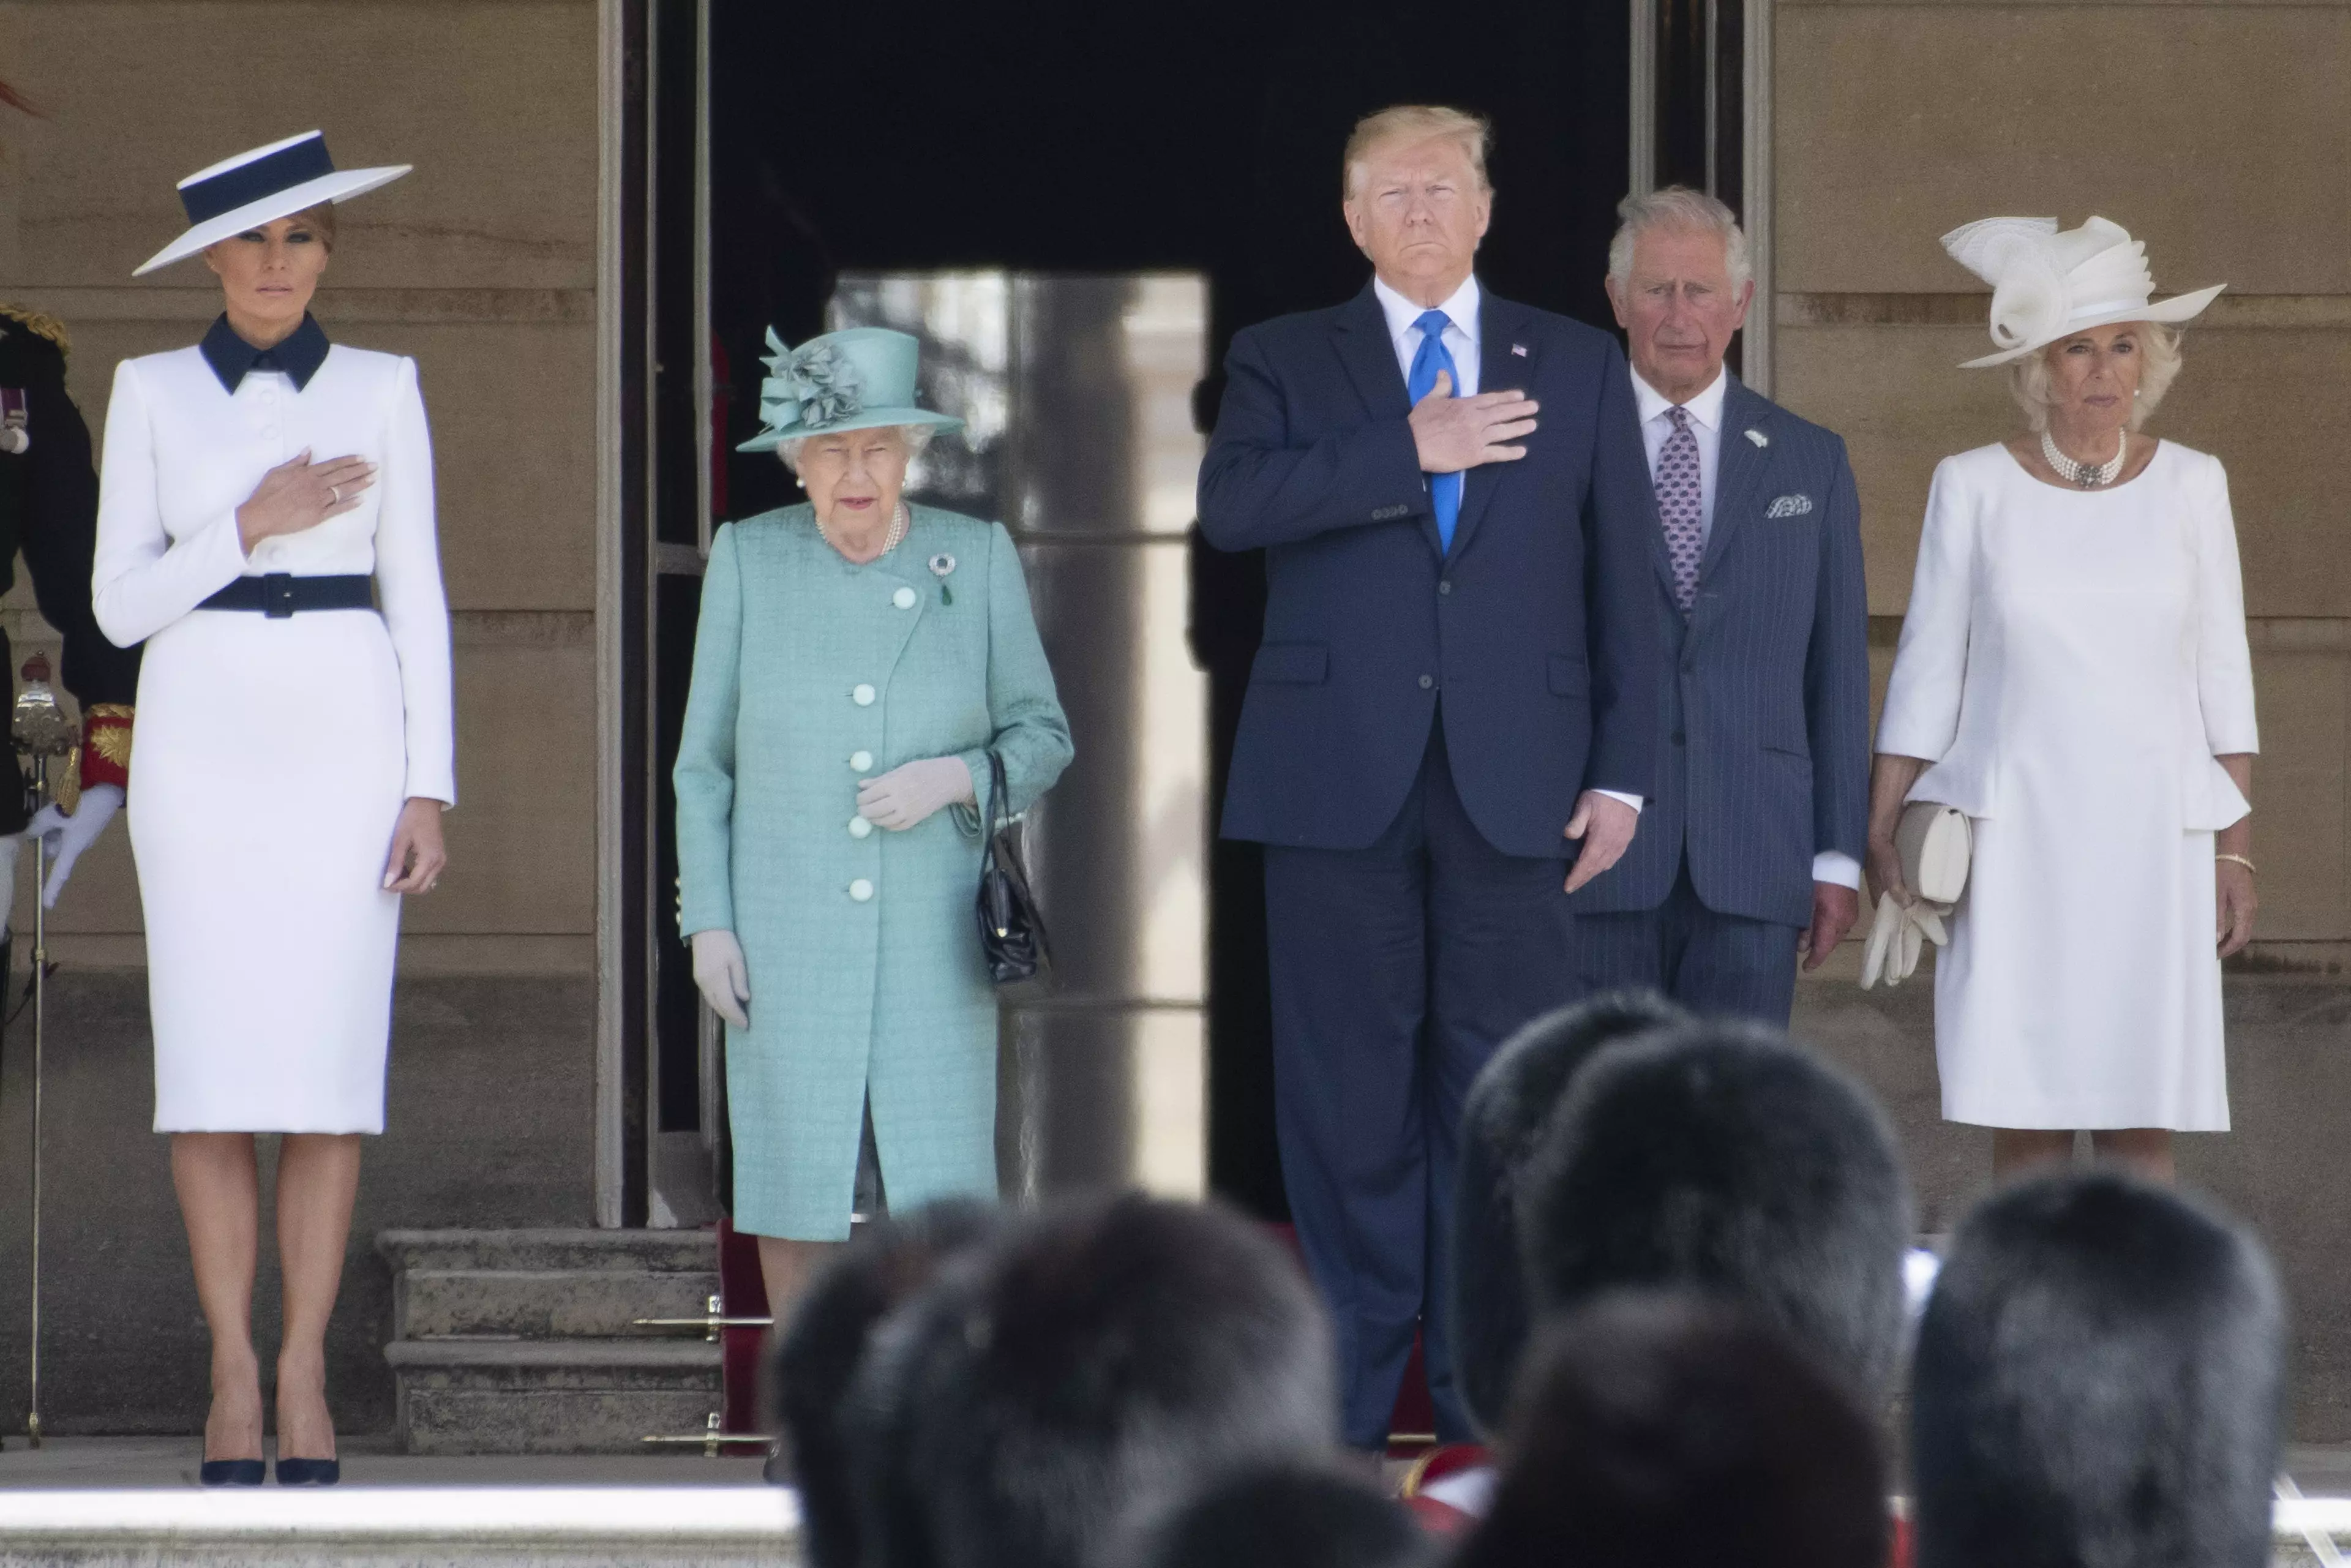 Trump is in the UK for a state visit and gave an address at Buckingham Palace.